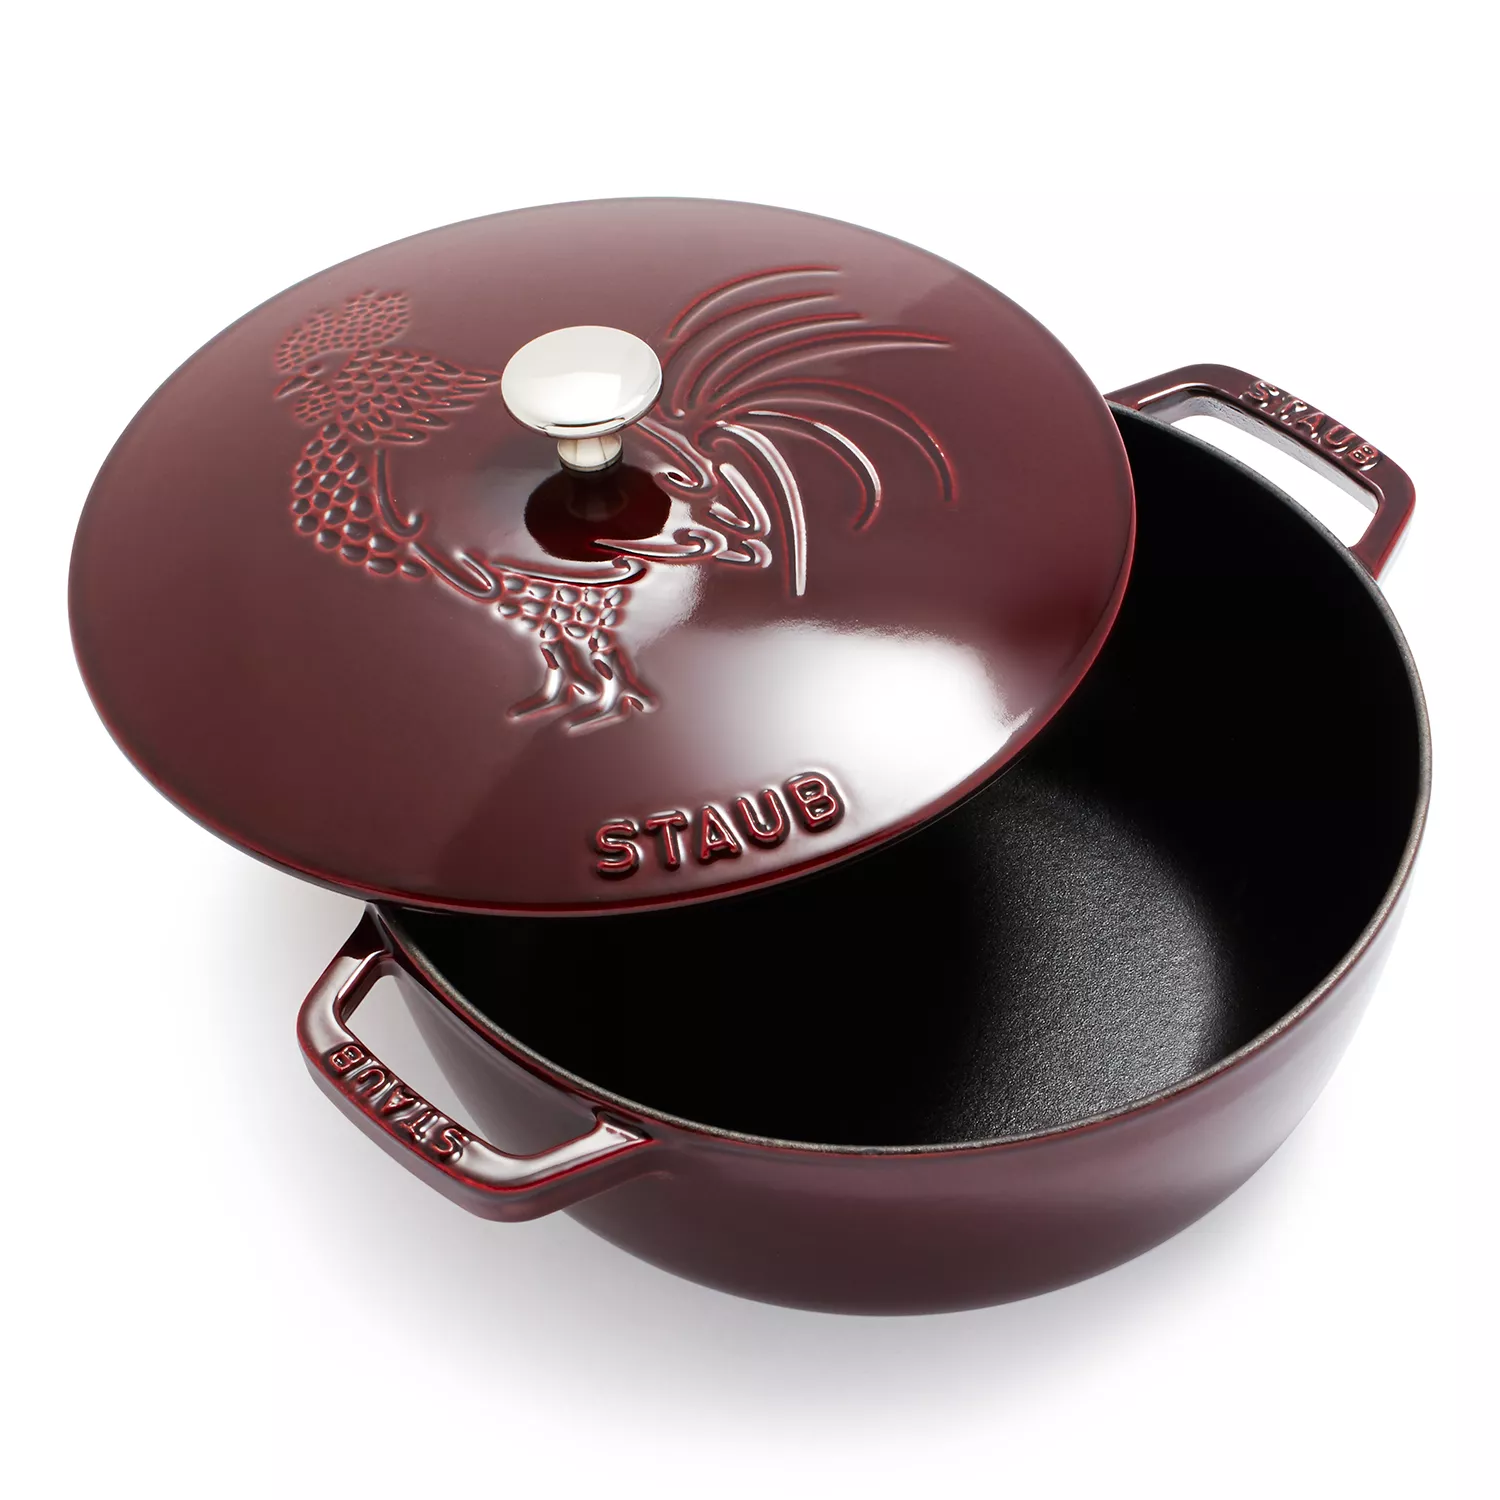 Photos - Terrine / Cauldron Staub Essential French Oven with Rooster Lid 11752487 